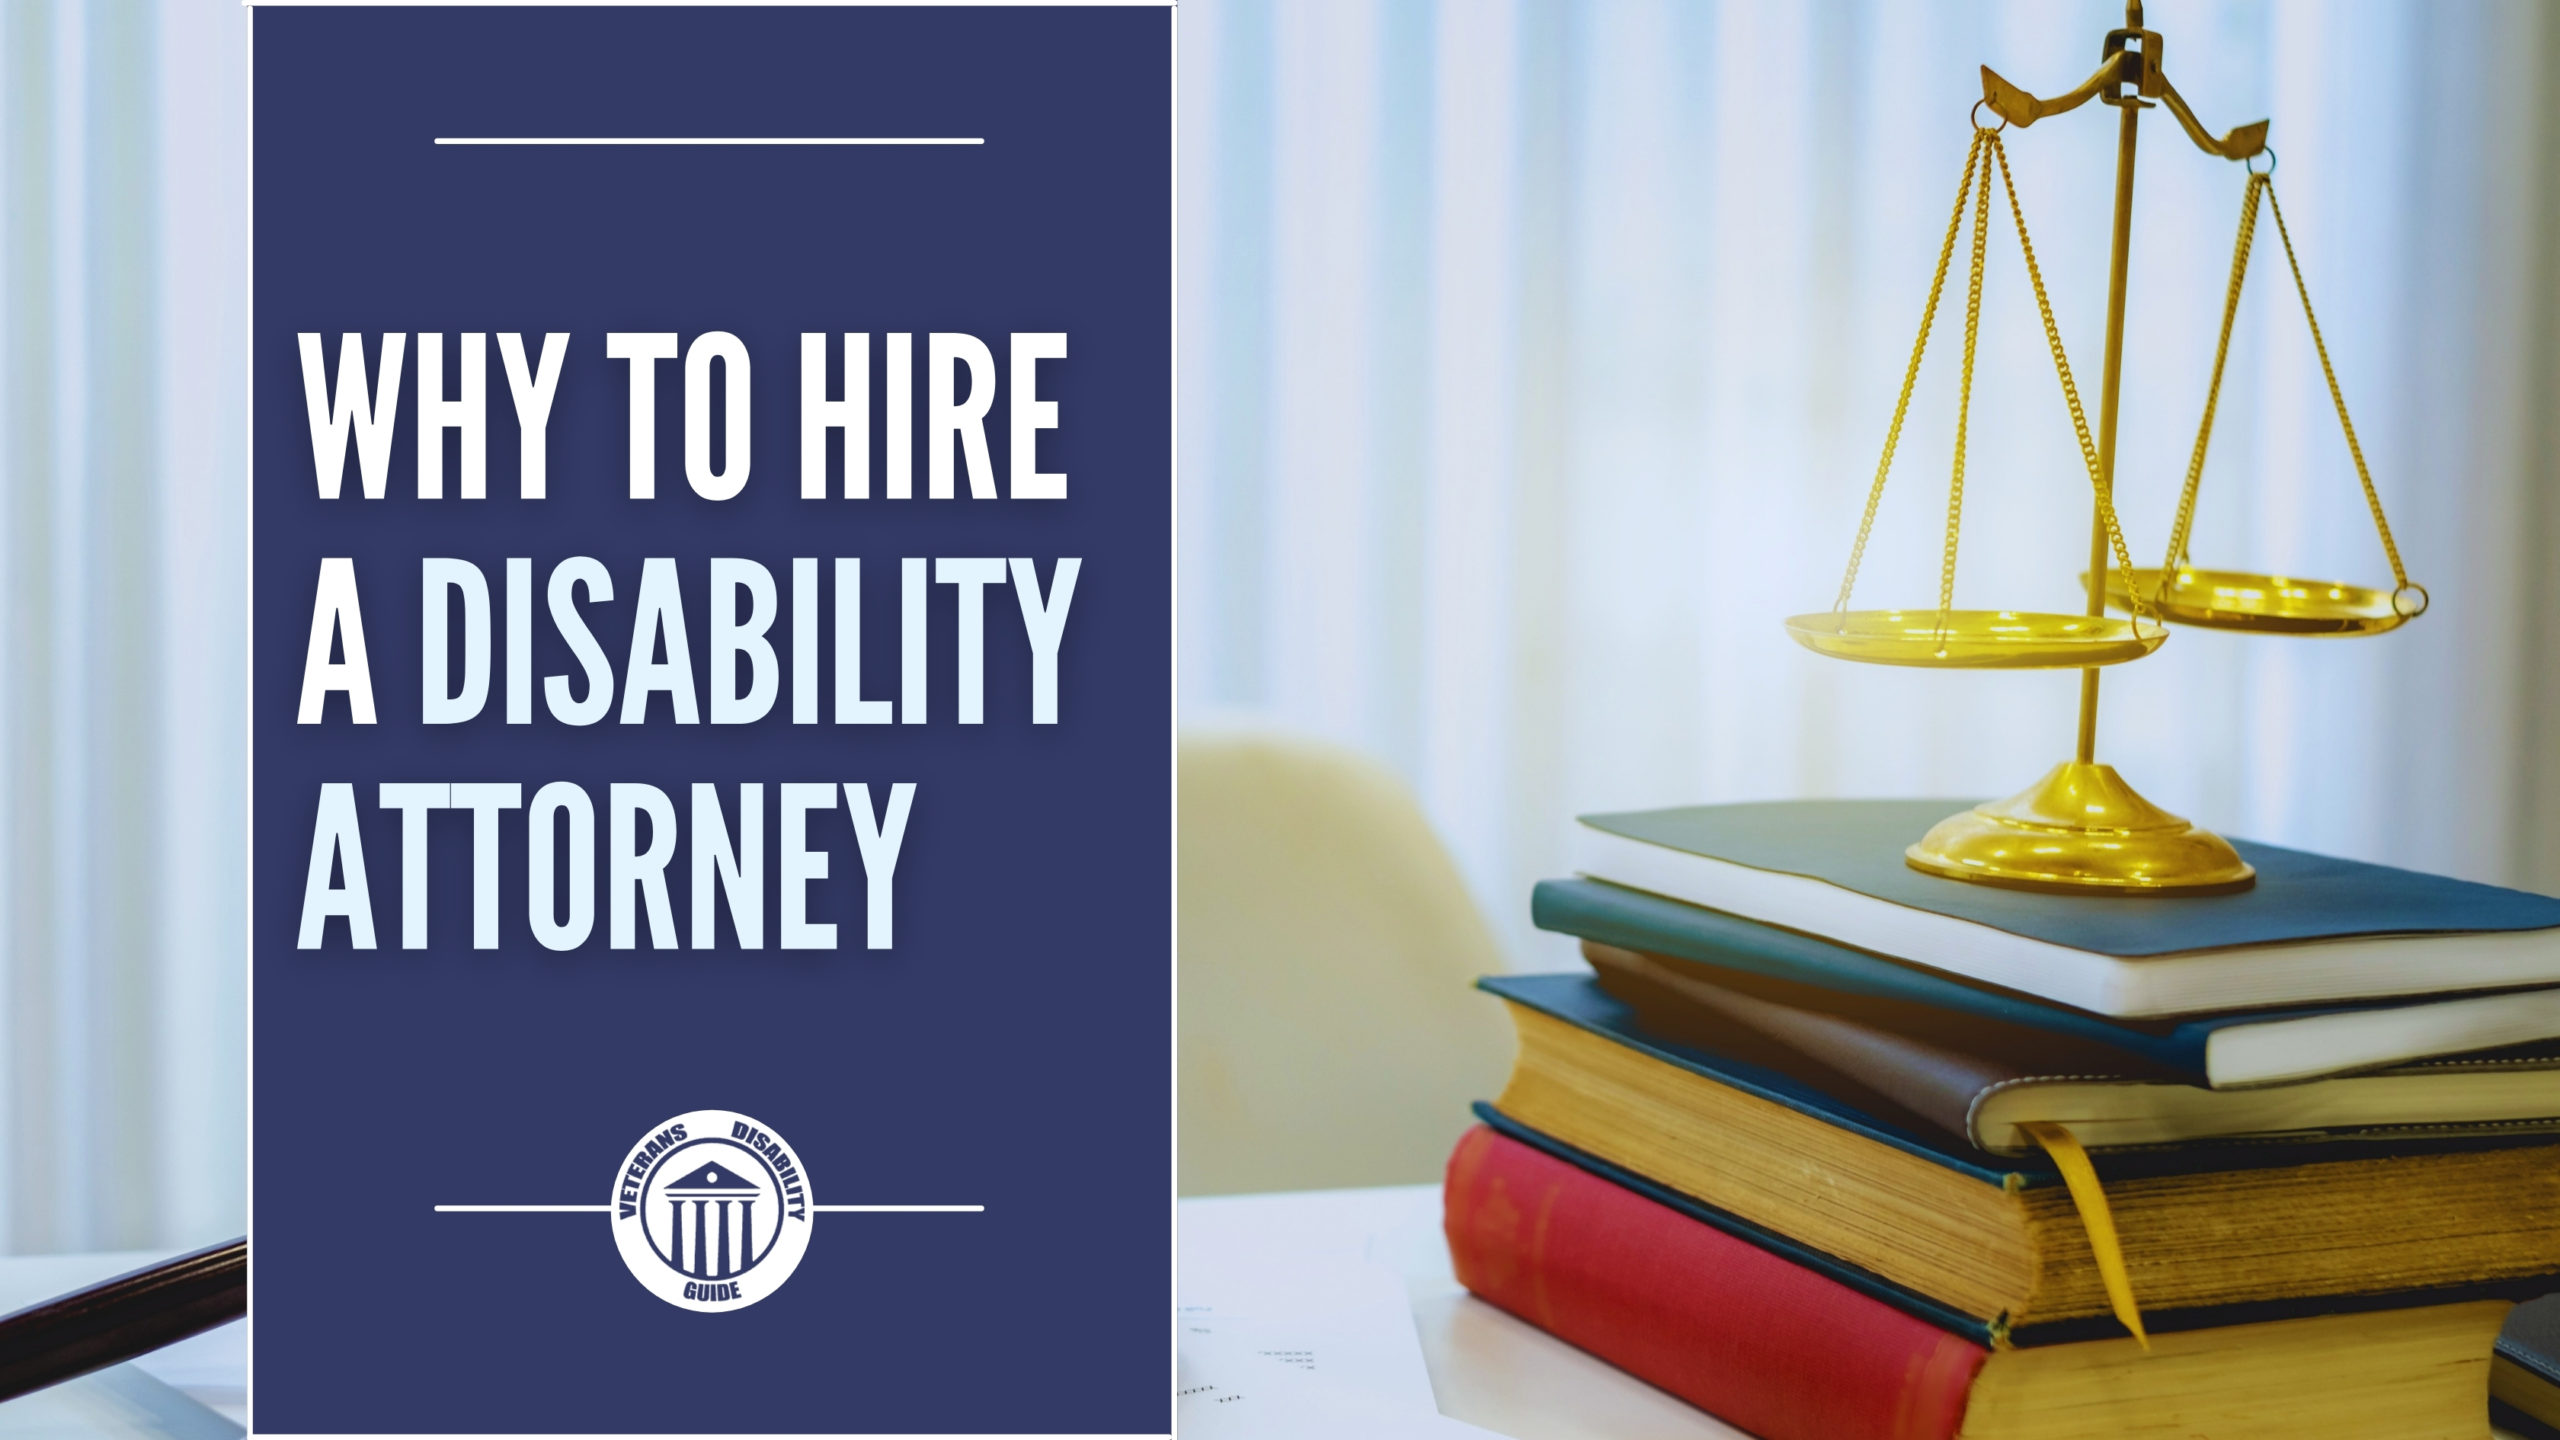 Why to hire a disability attorney blog header